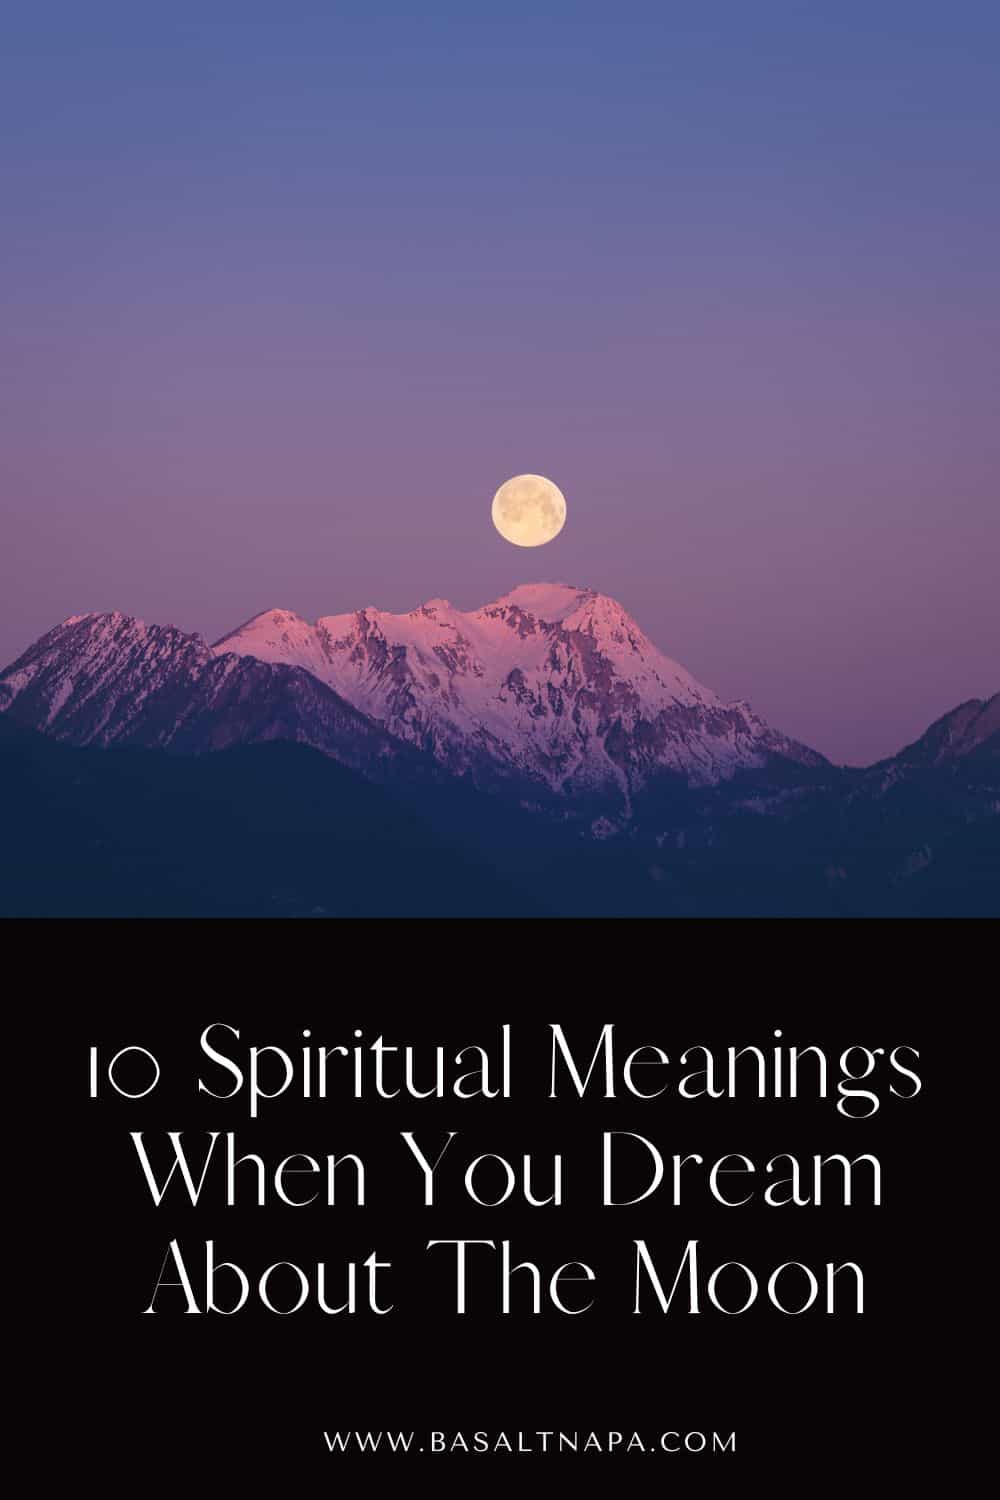 10 Spiritual Meanings When You Dream About The Moon